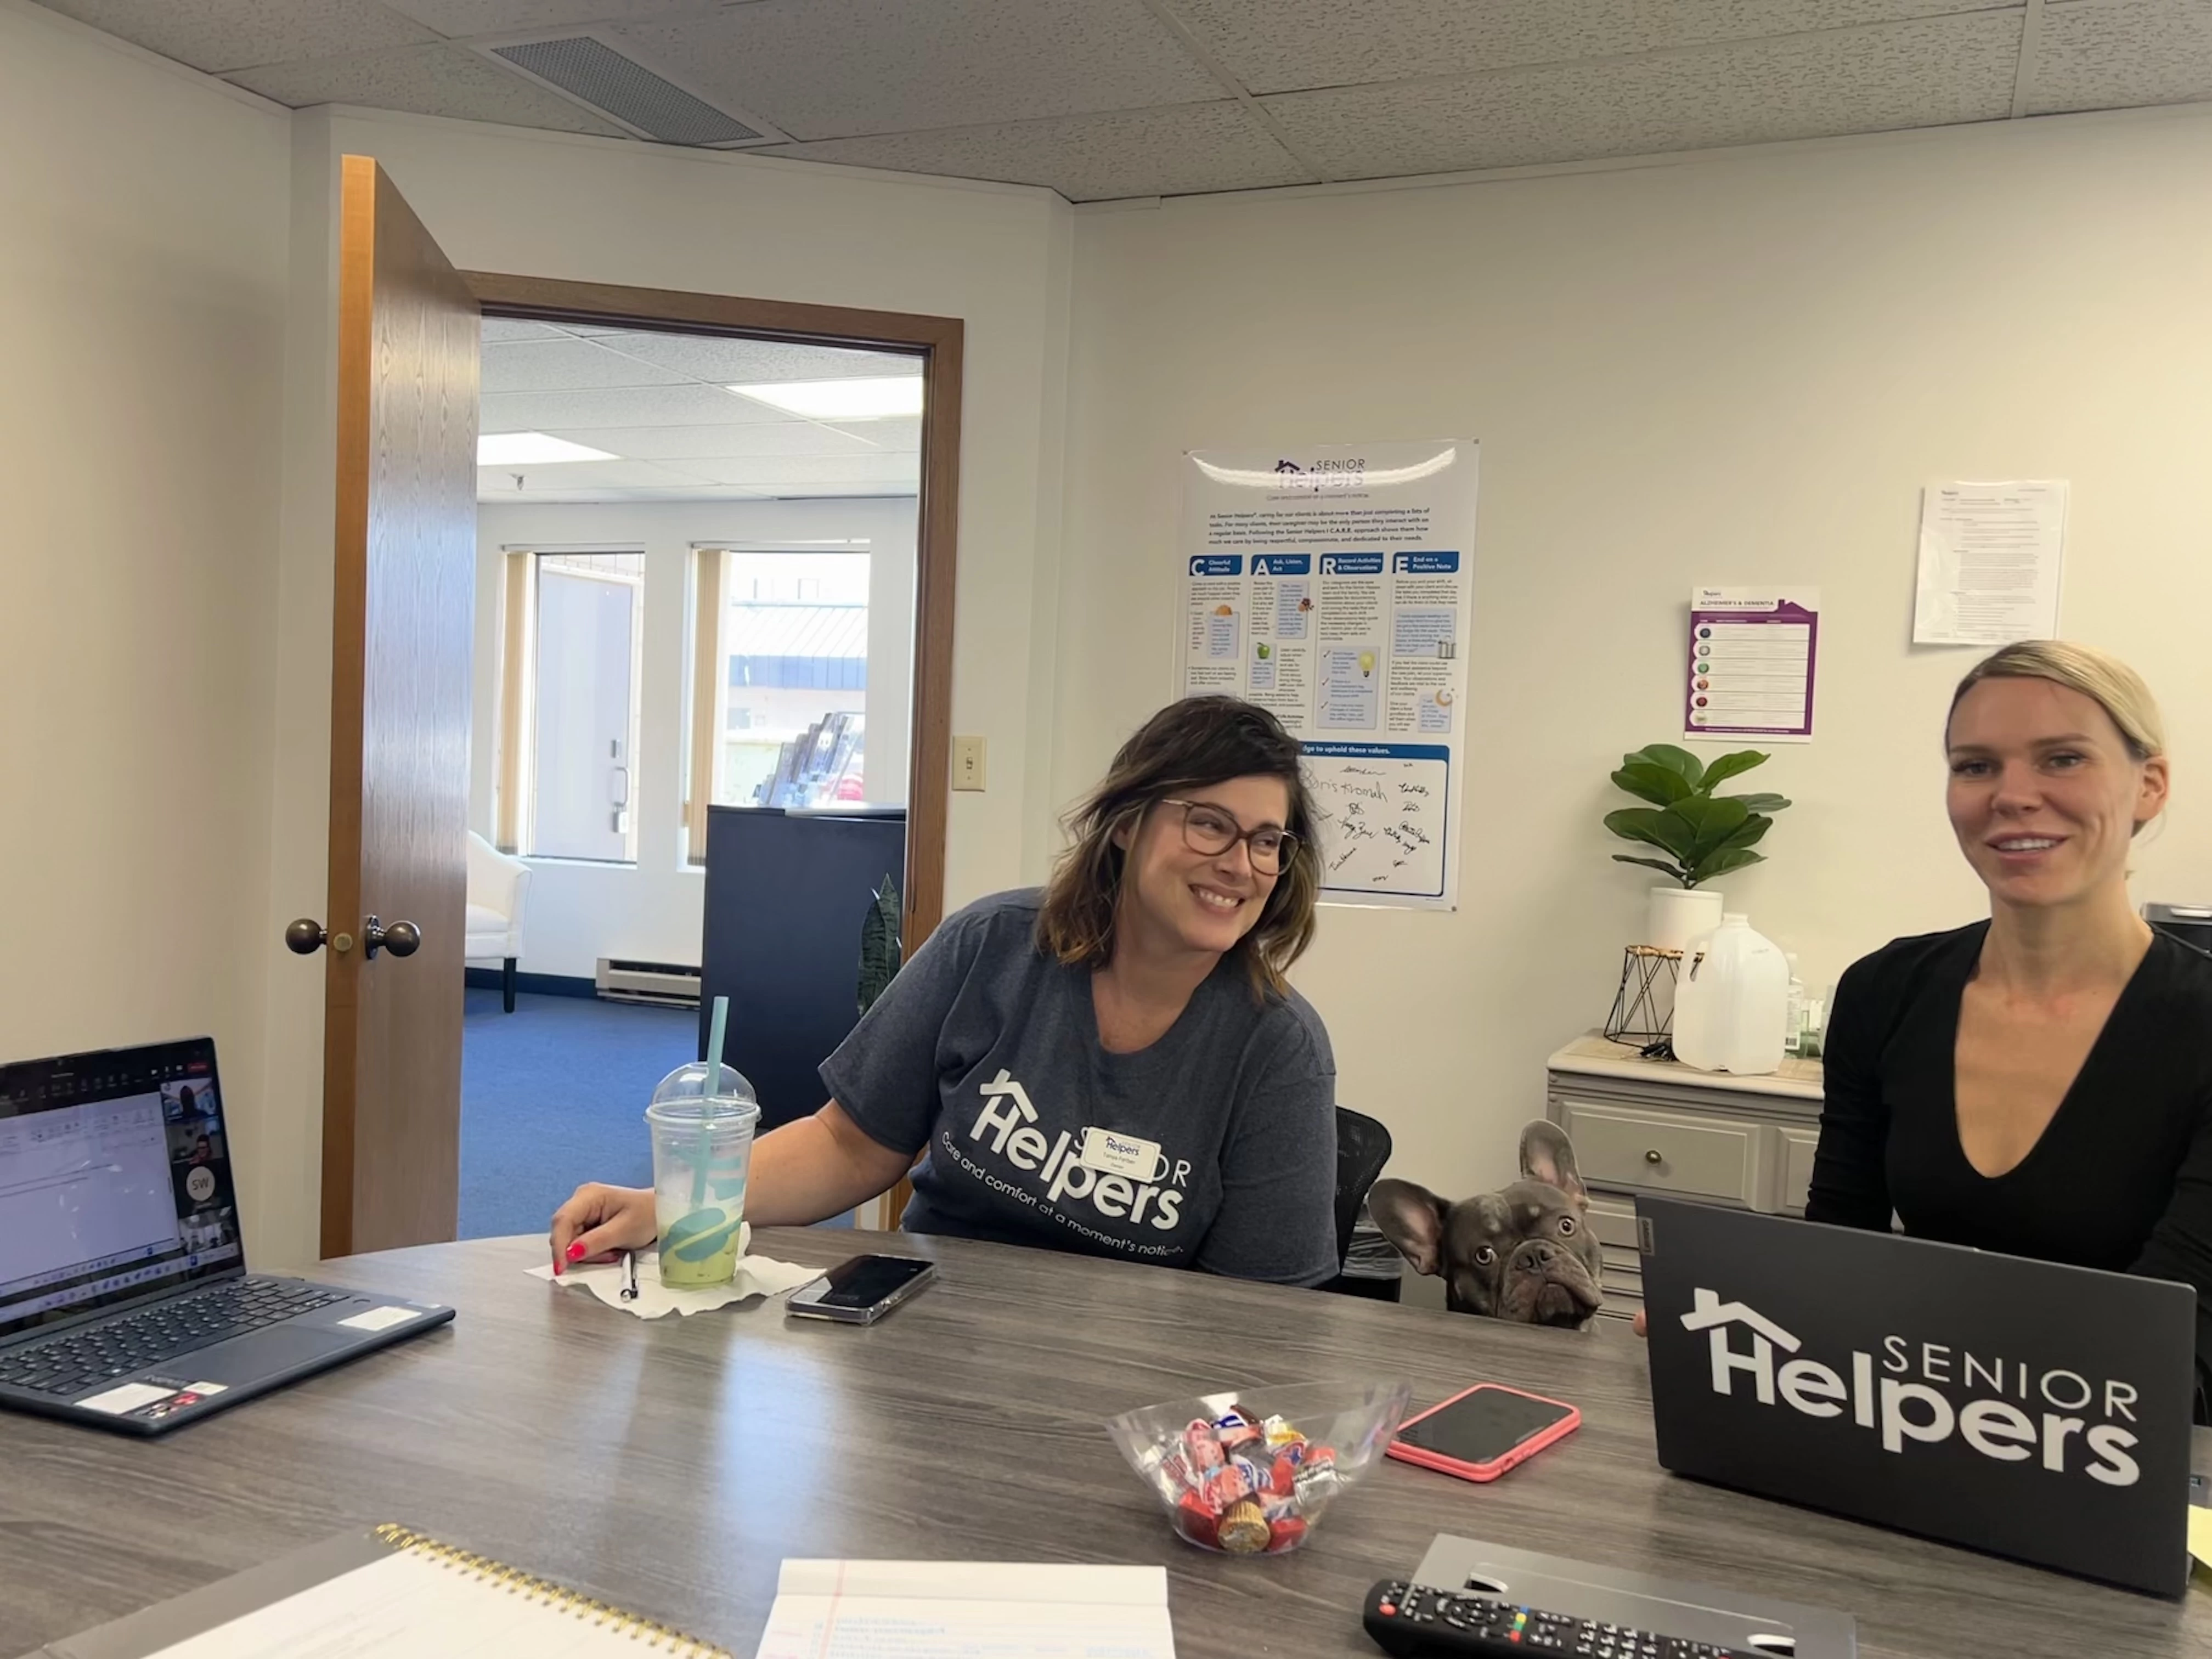 Tanya and Emily enjoying some laughs in the Senior Helpers Edina office!